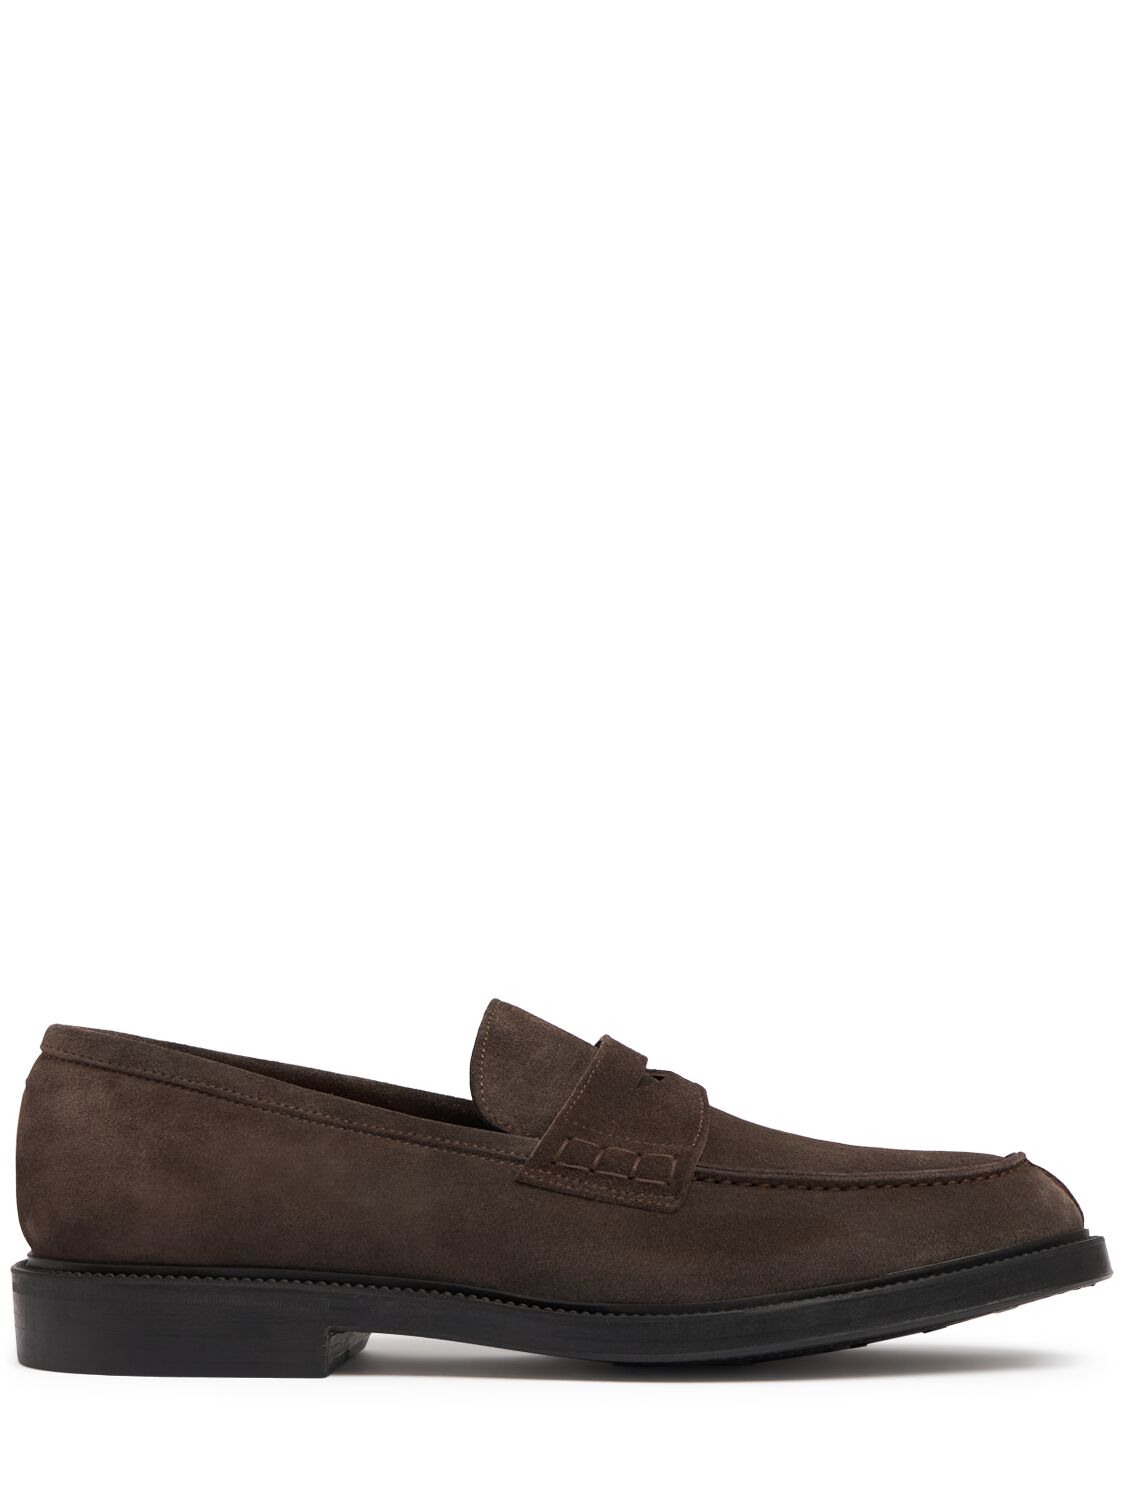 Kiton Suede Penny Loafers In Pepper